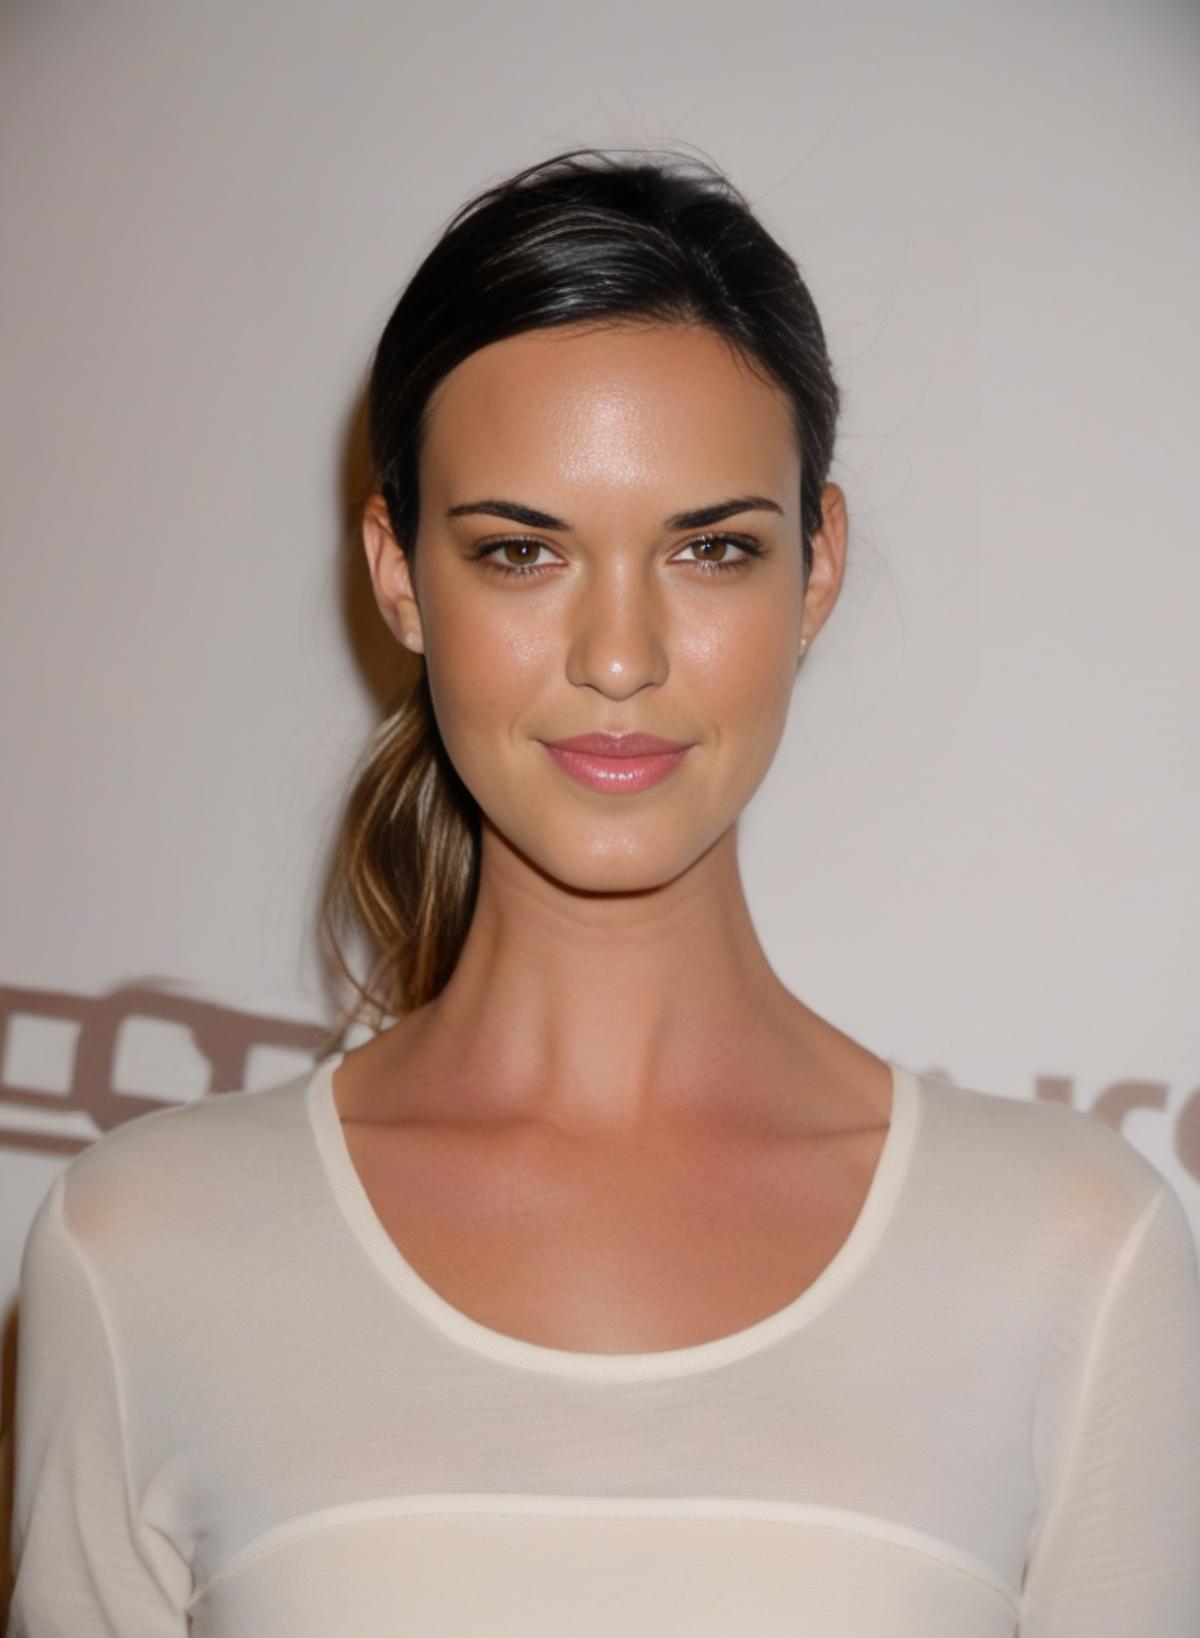 Odette Annable image by parar20